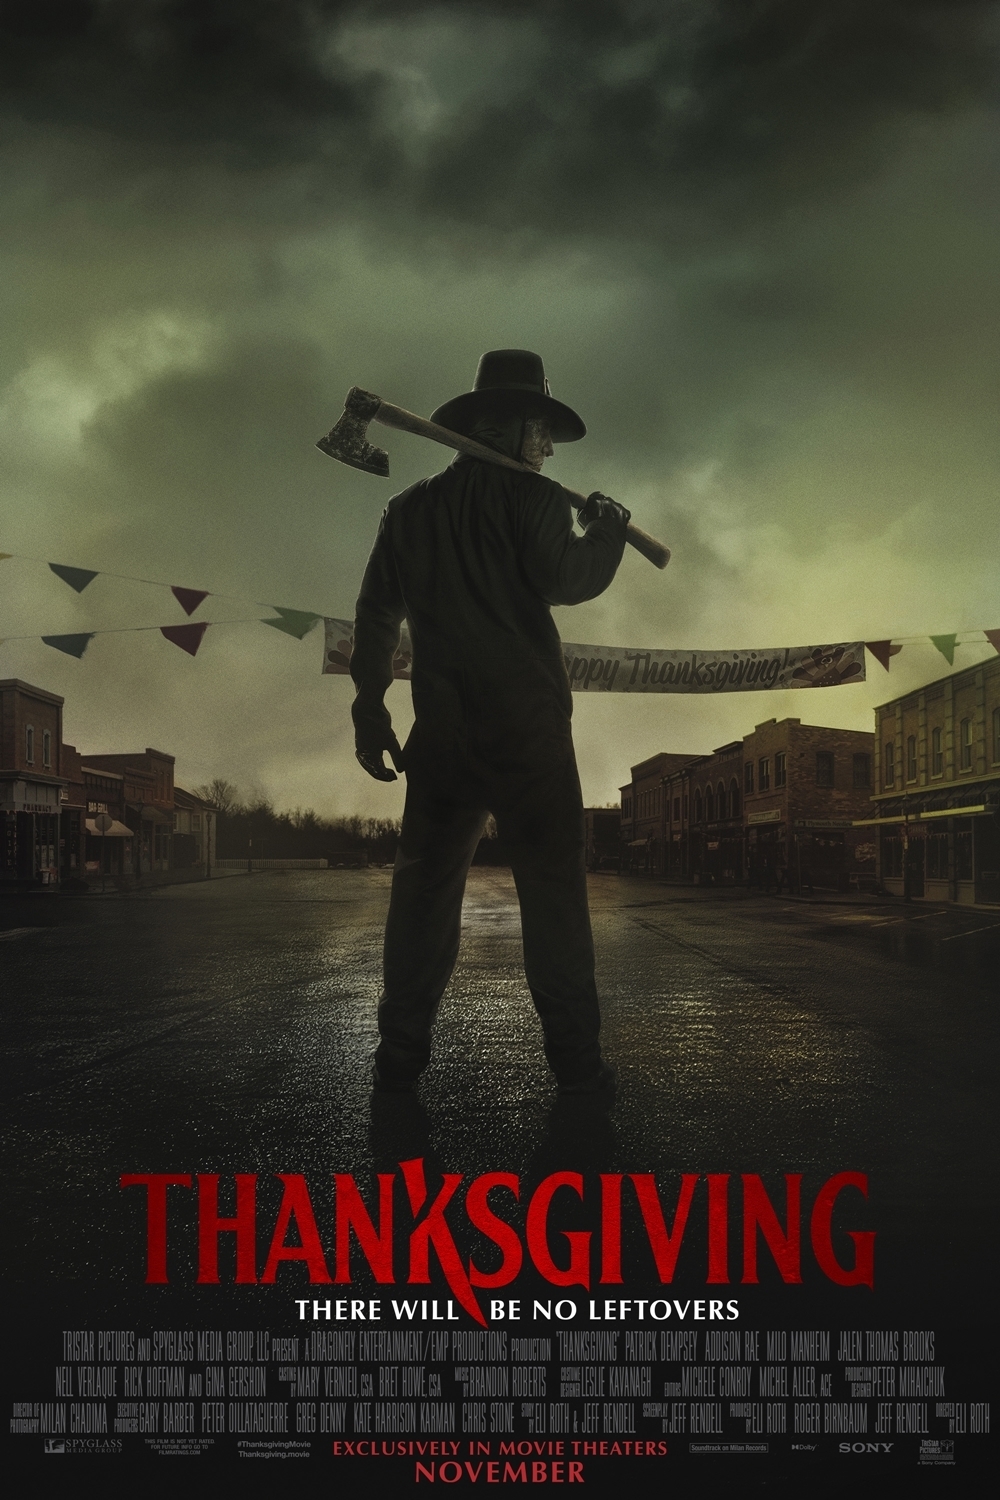 Poster of Thanksgiving